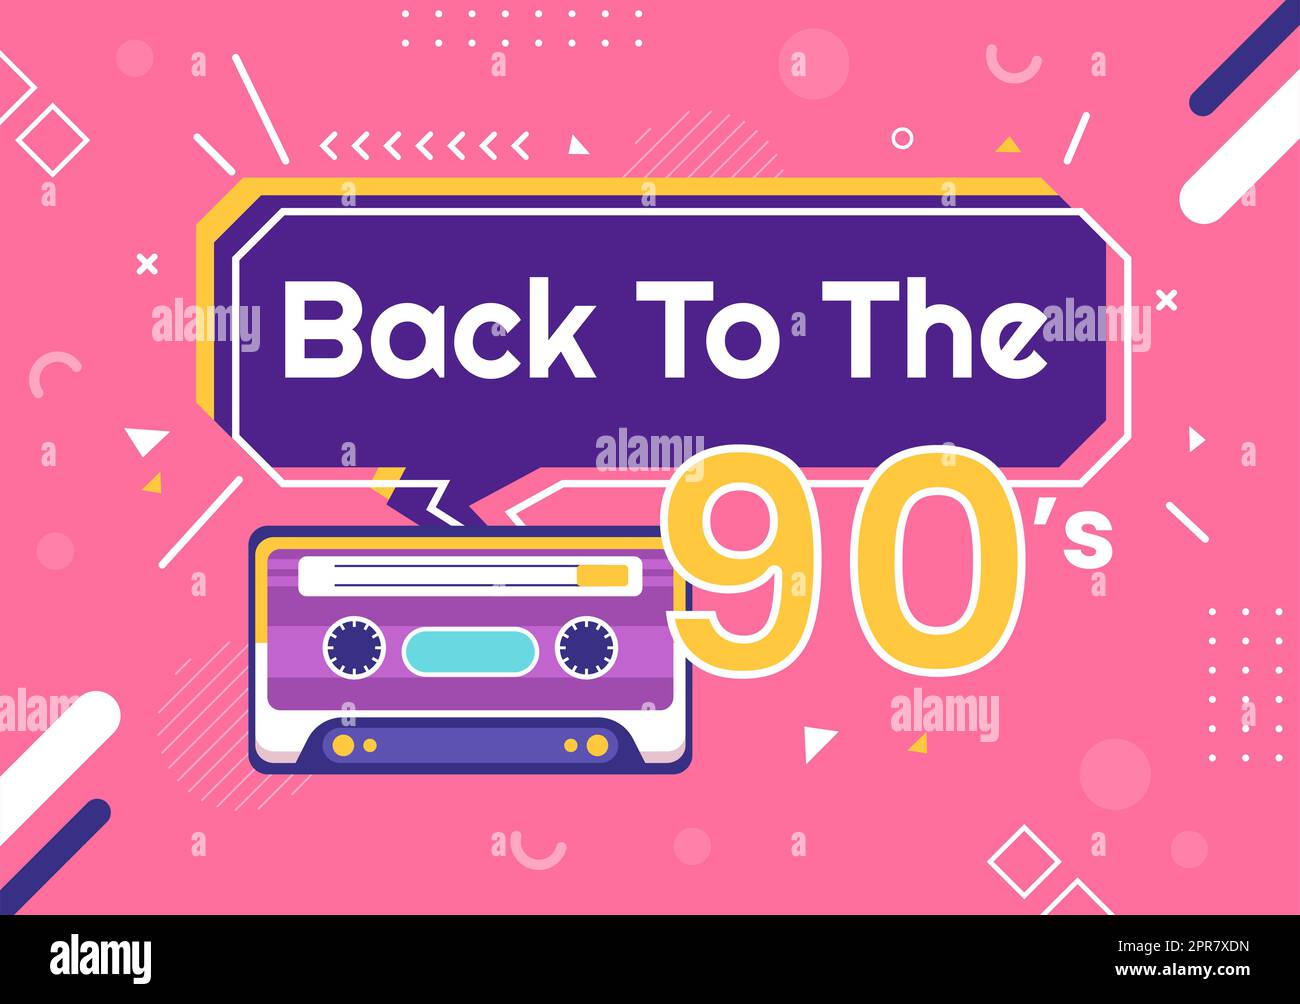 90s Retro Party Cartoon Background Illustration with Nineties Music,  Sneakers, Radio, Dance Time and Tape Cassette in Trendy Flat Style Design  Stock Photo - Alamy